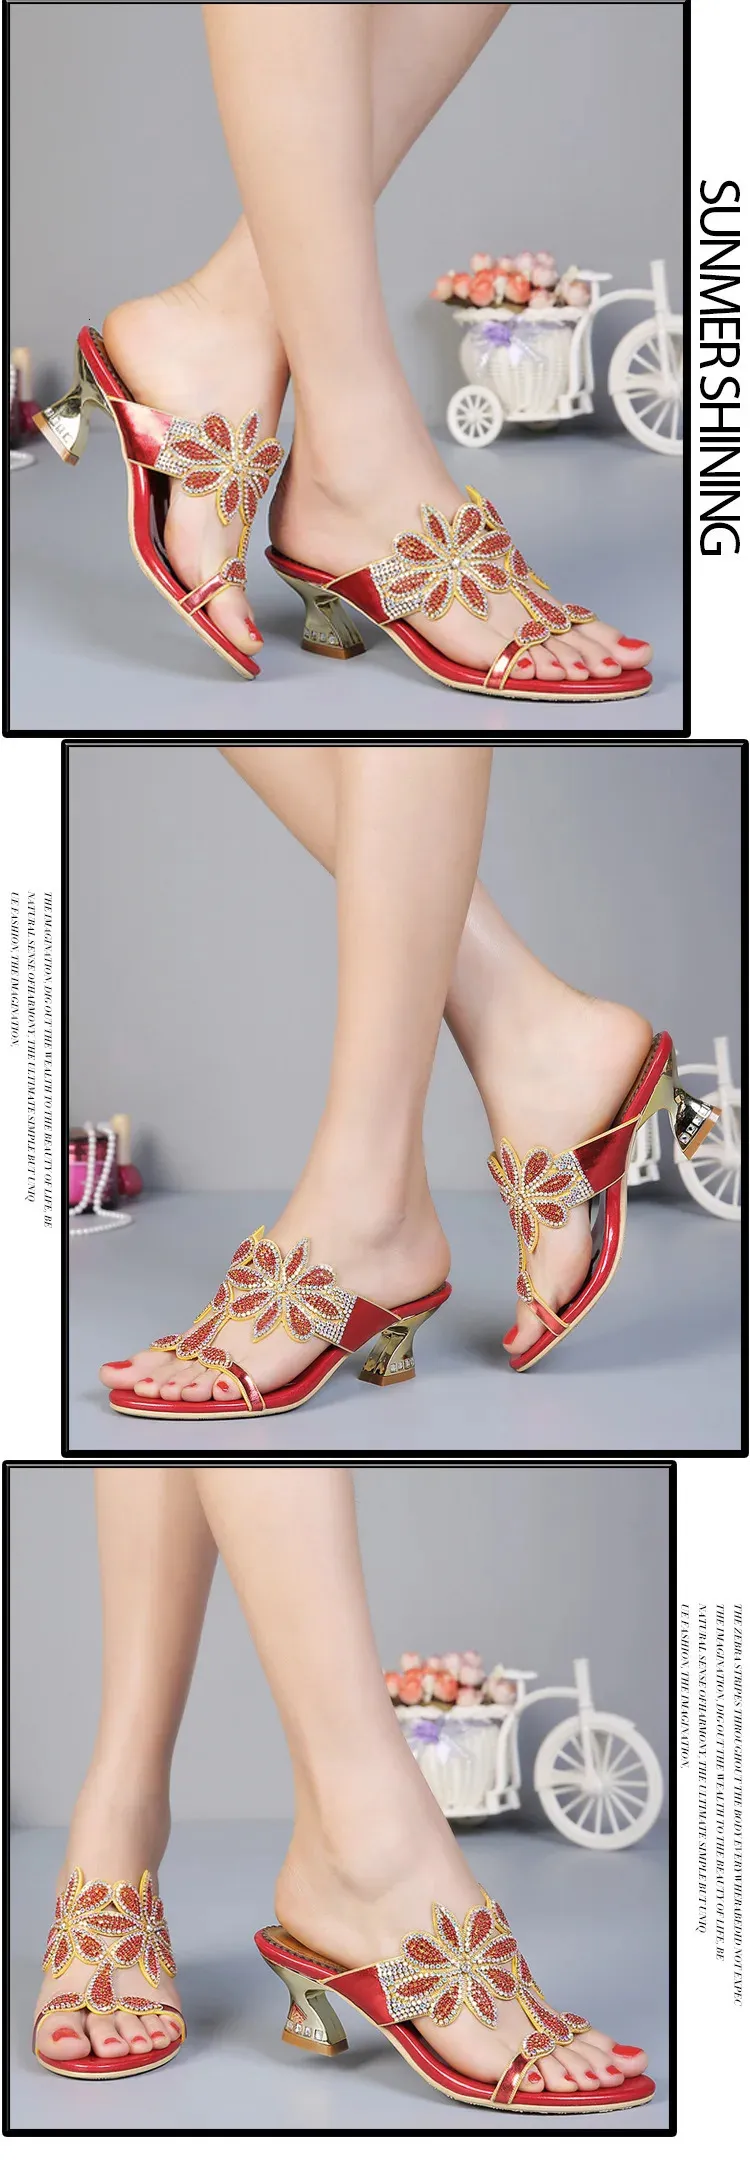 2016 Summer New Fashion Diamond Buckle Elegant Shoes 6cm Female Temperament Thick With Sandals Gold Red High Quality3